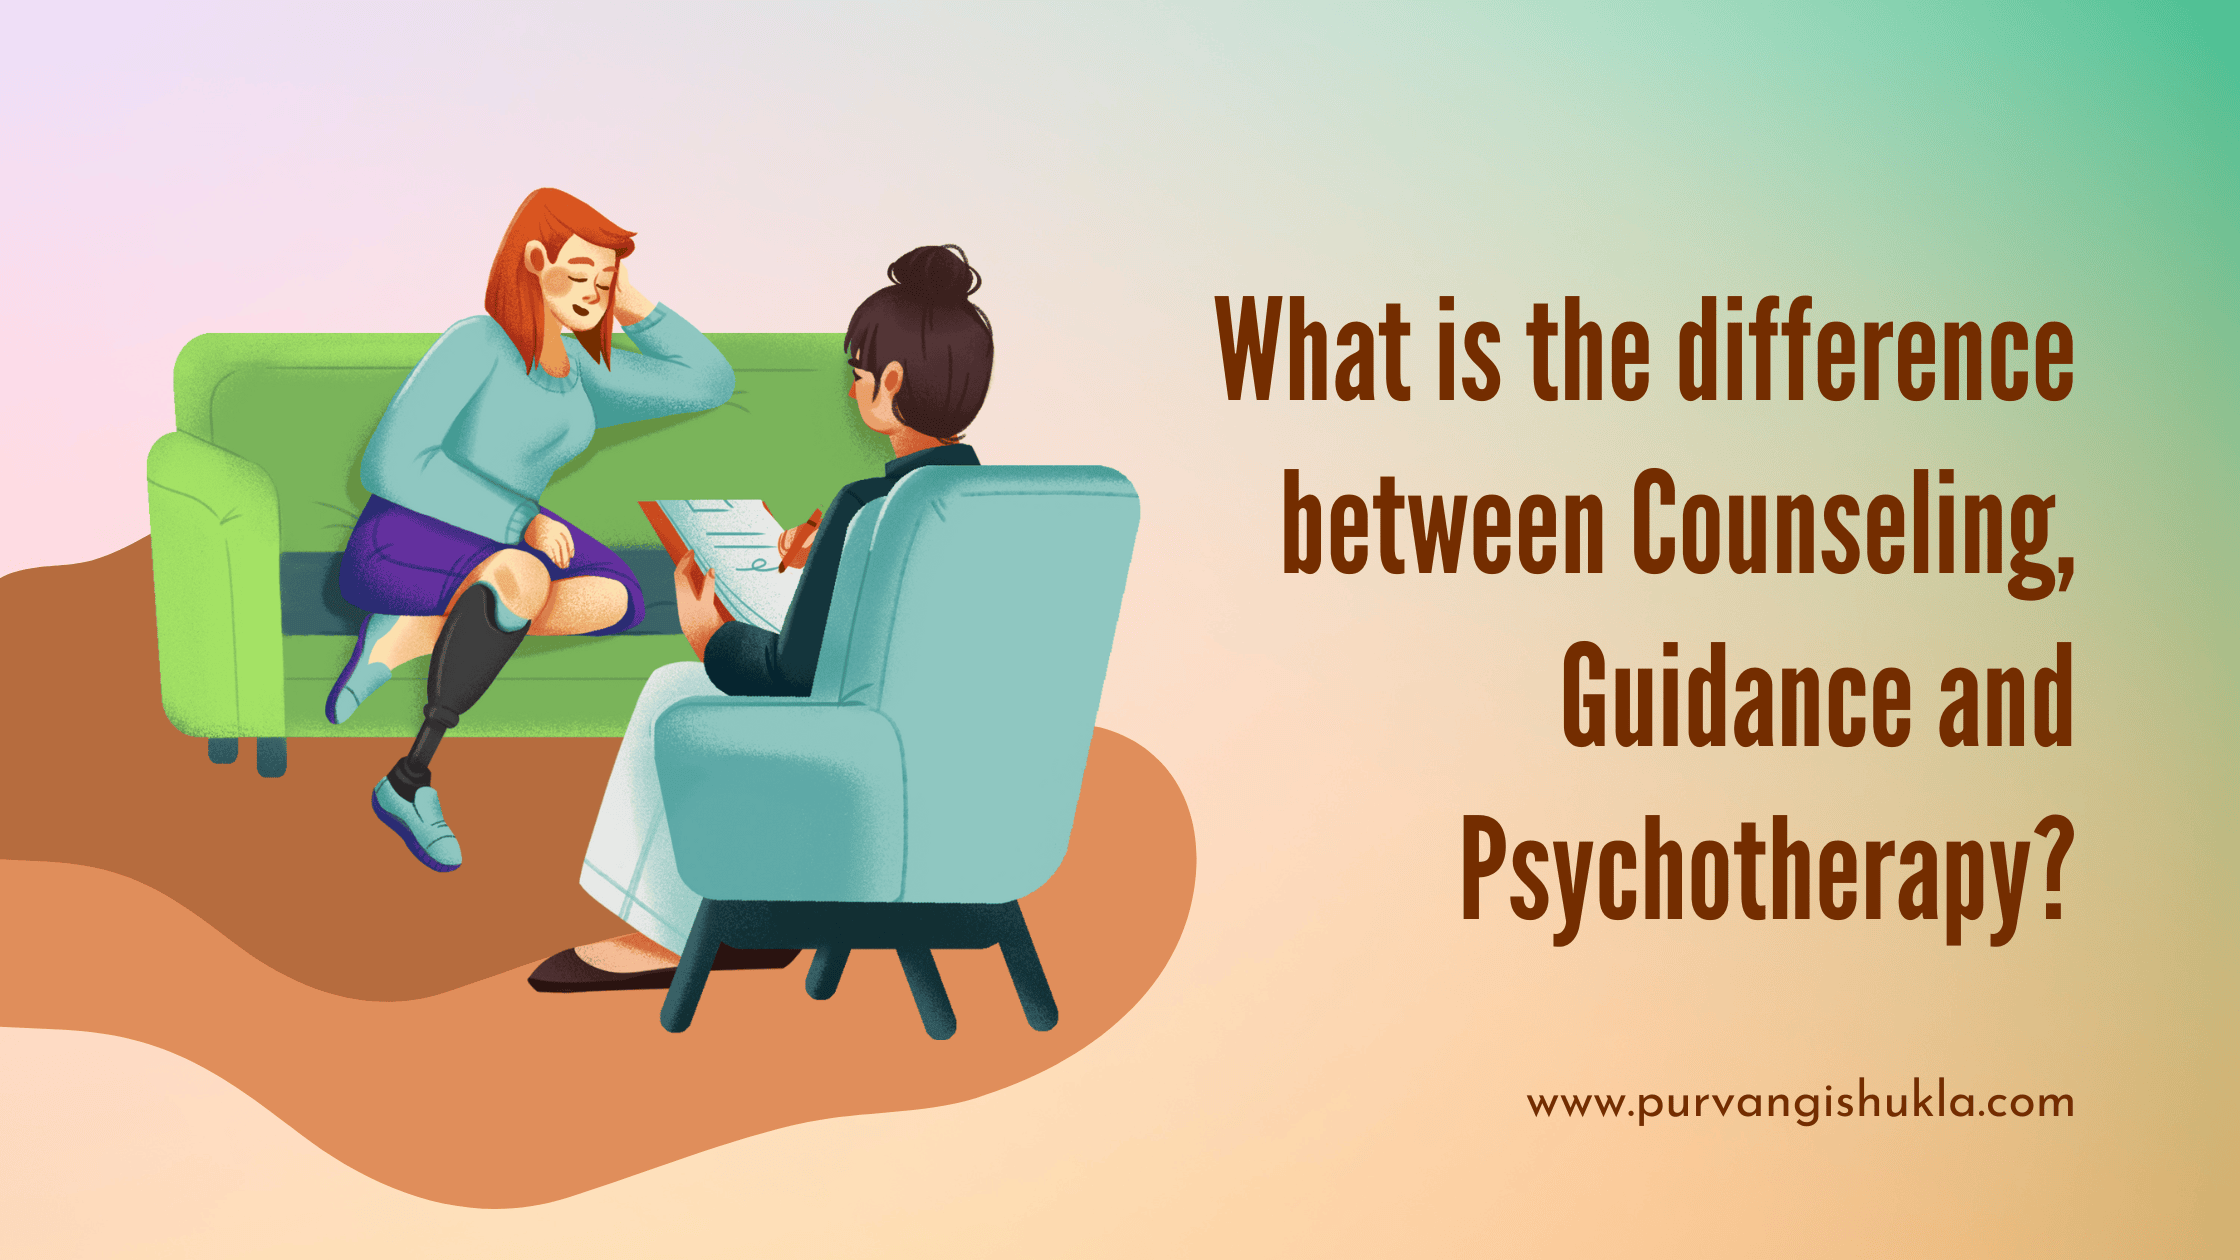 What is the difference between Counseling, Guidance and Psychotherapy